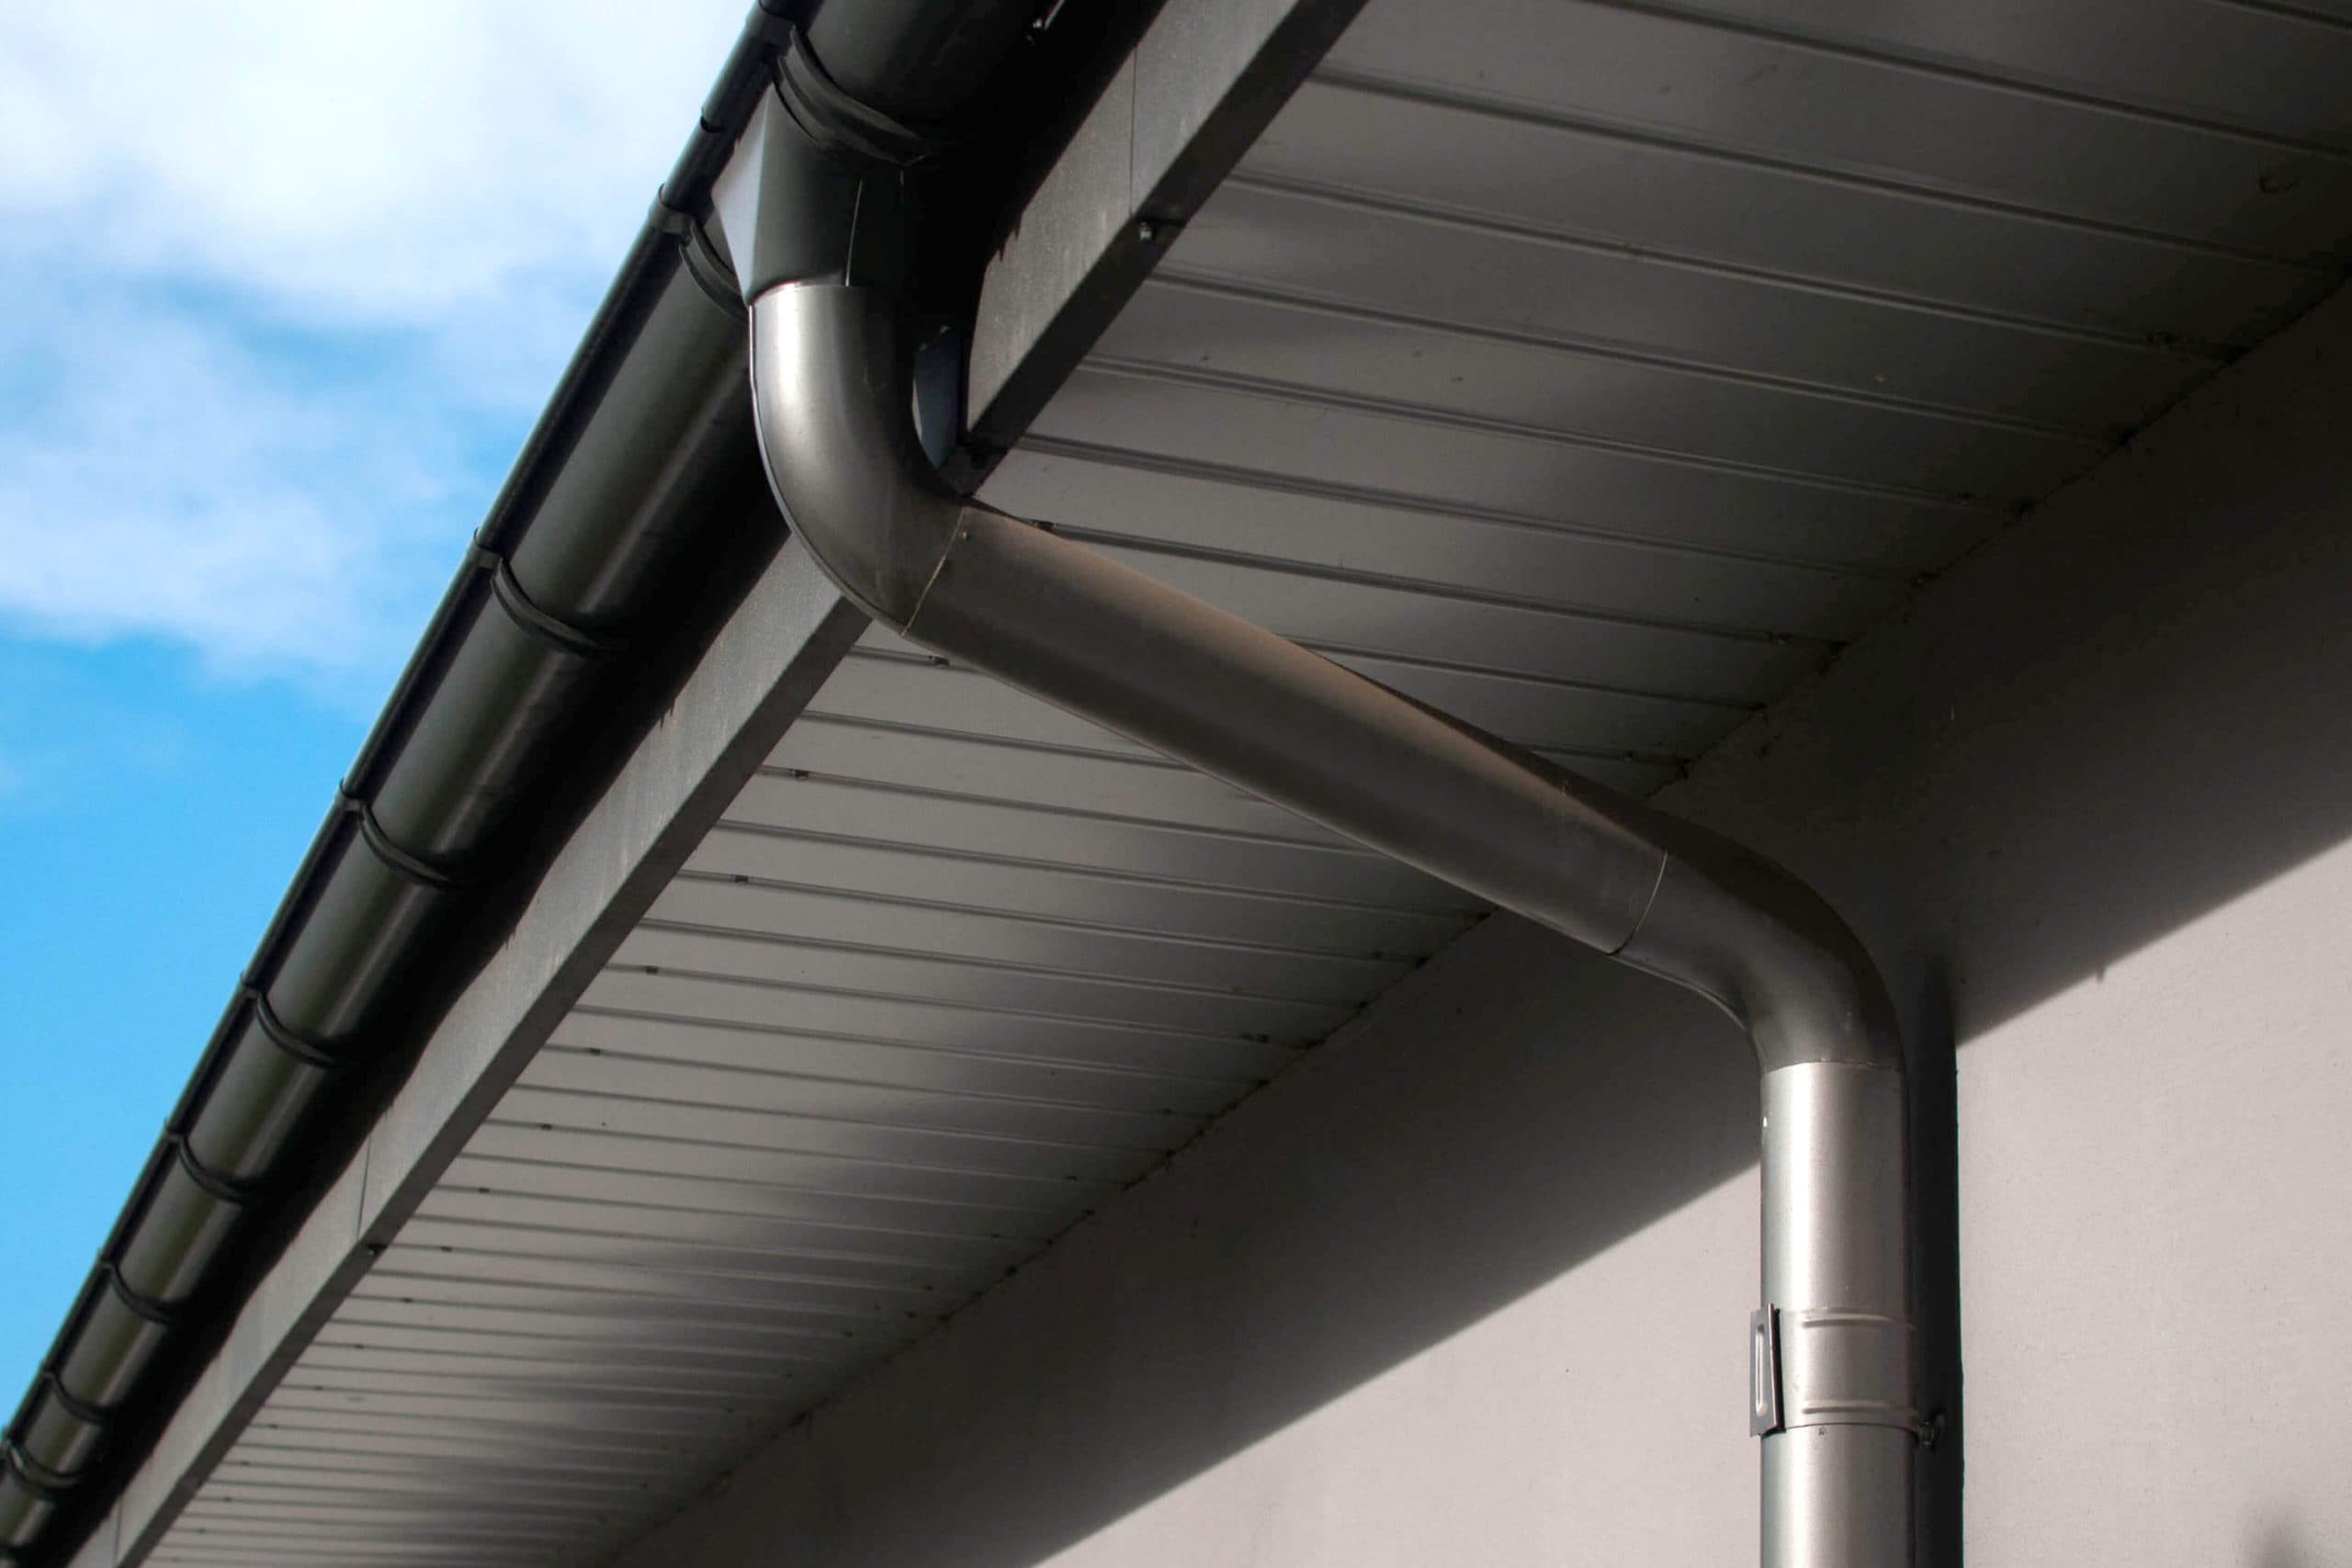 Corrosion-resistant galvanized gutters installed on a commercial building in Tulsa